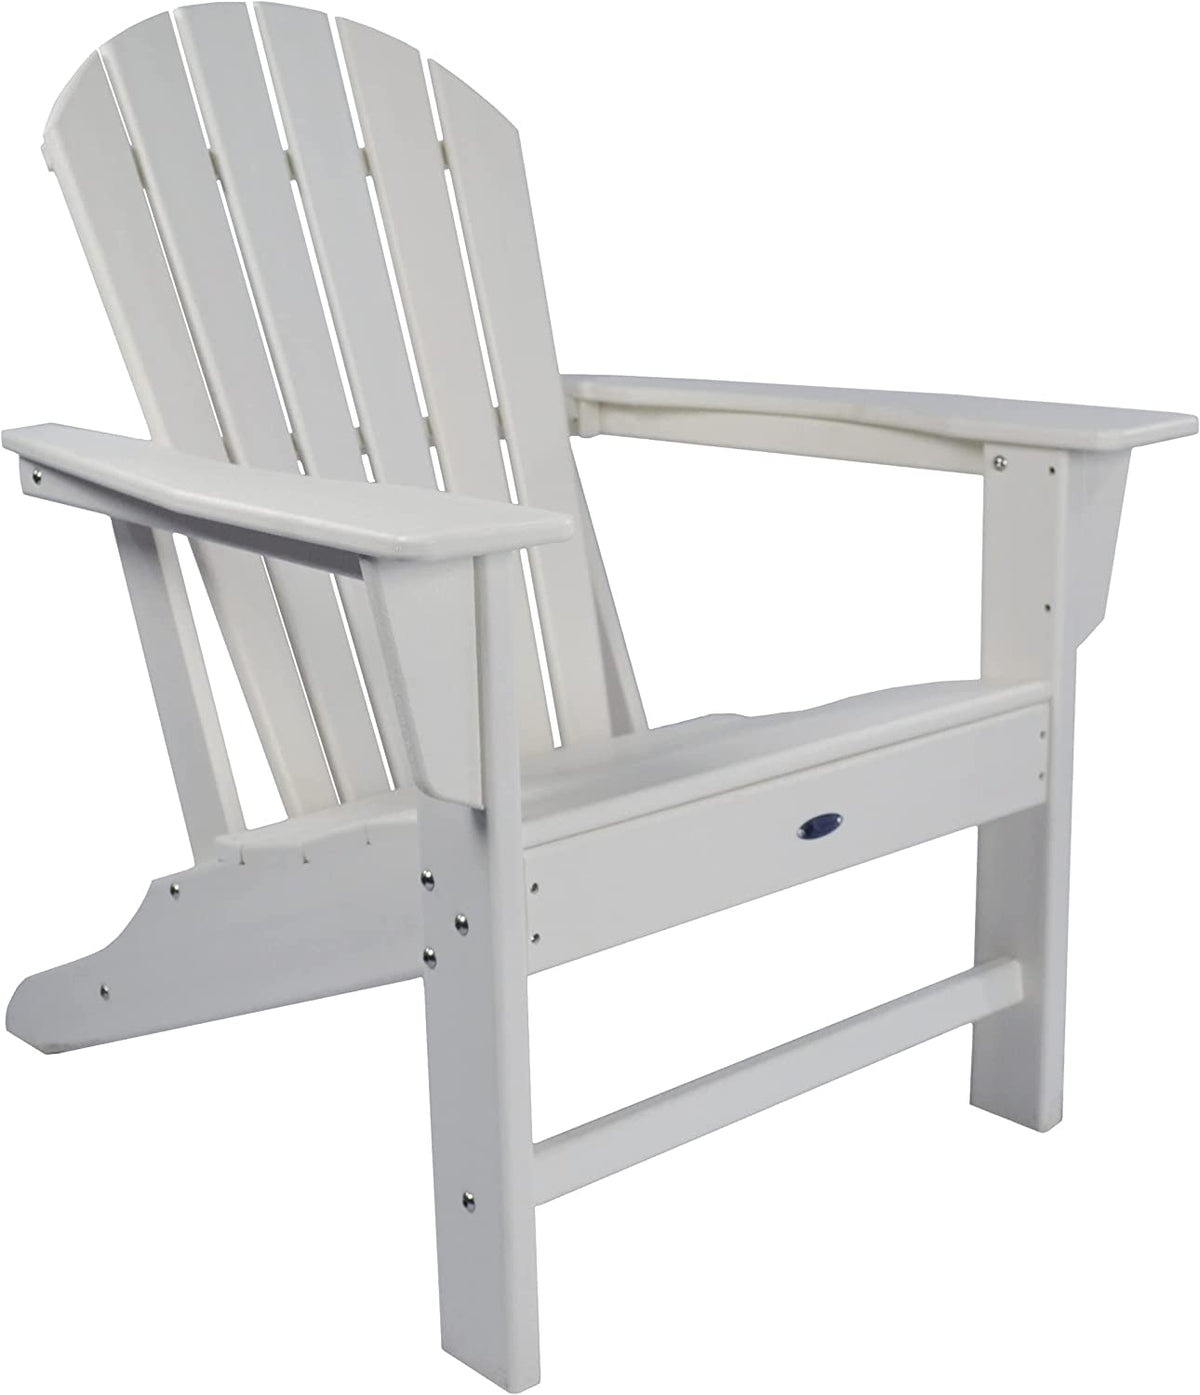 Adirondack Chair by Atlas, Surf City - White